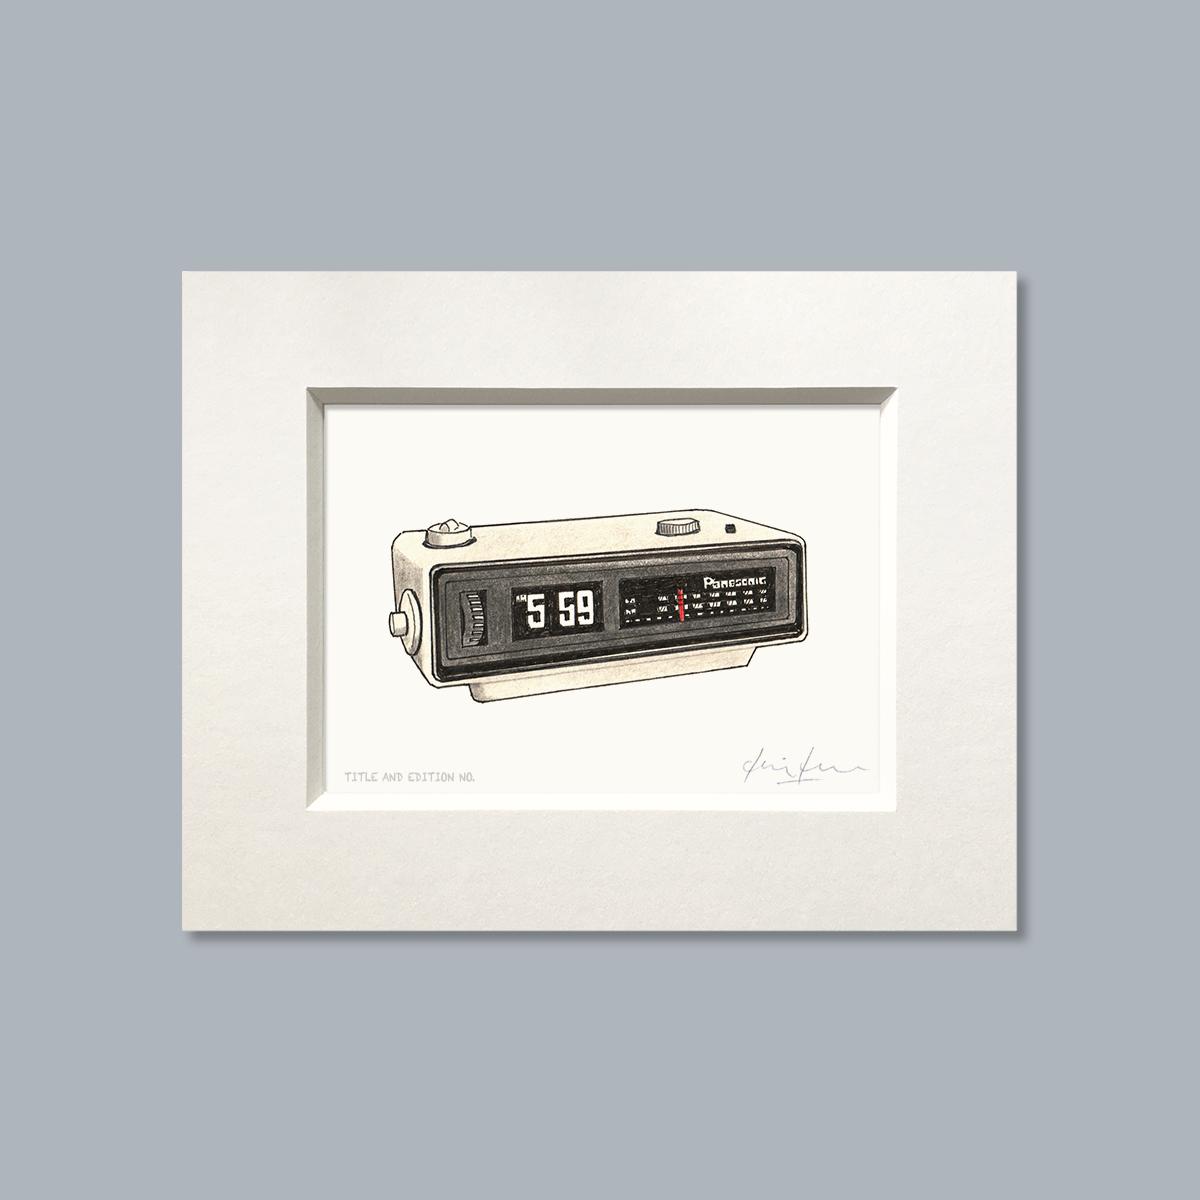 Limited edition print from a pen, ink and coloured pencil drawing of the alarm radio from the film Groundhog Day in a white mount